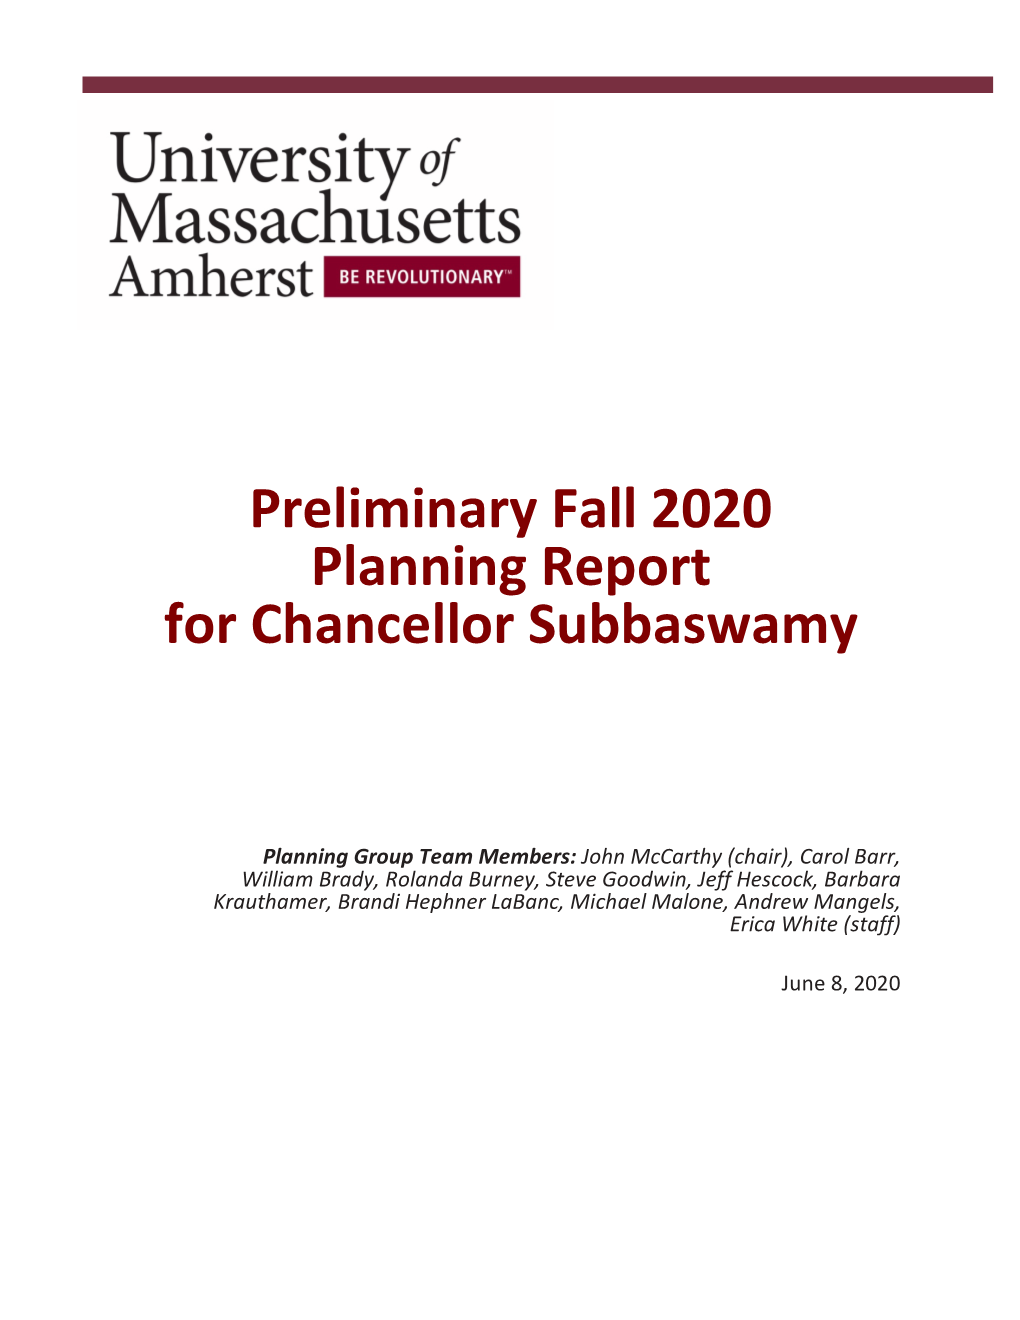 Preliminary Fall 2020 Planning Report for Chancellor Subbaswamy